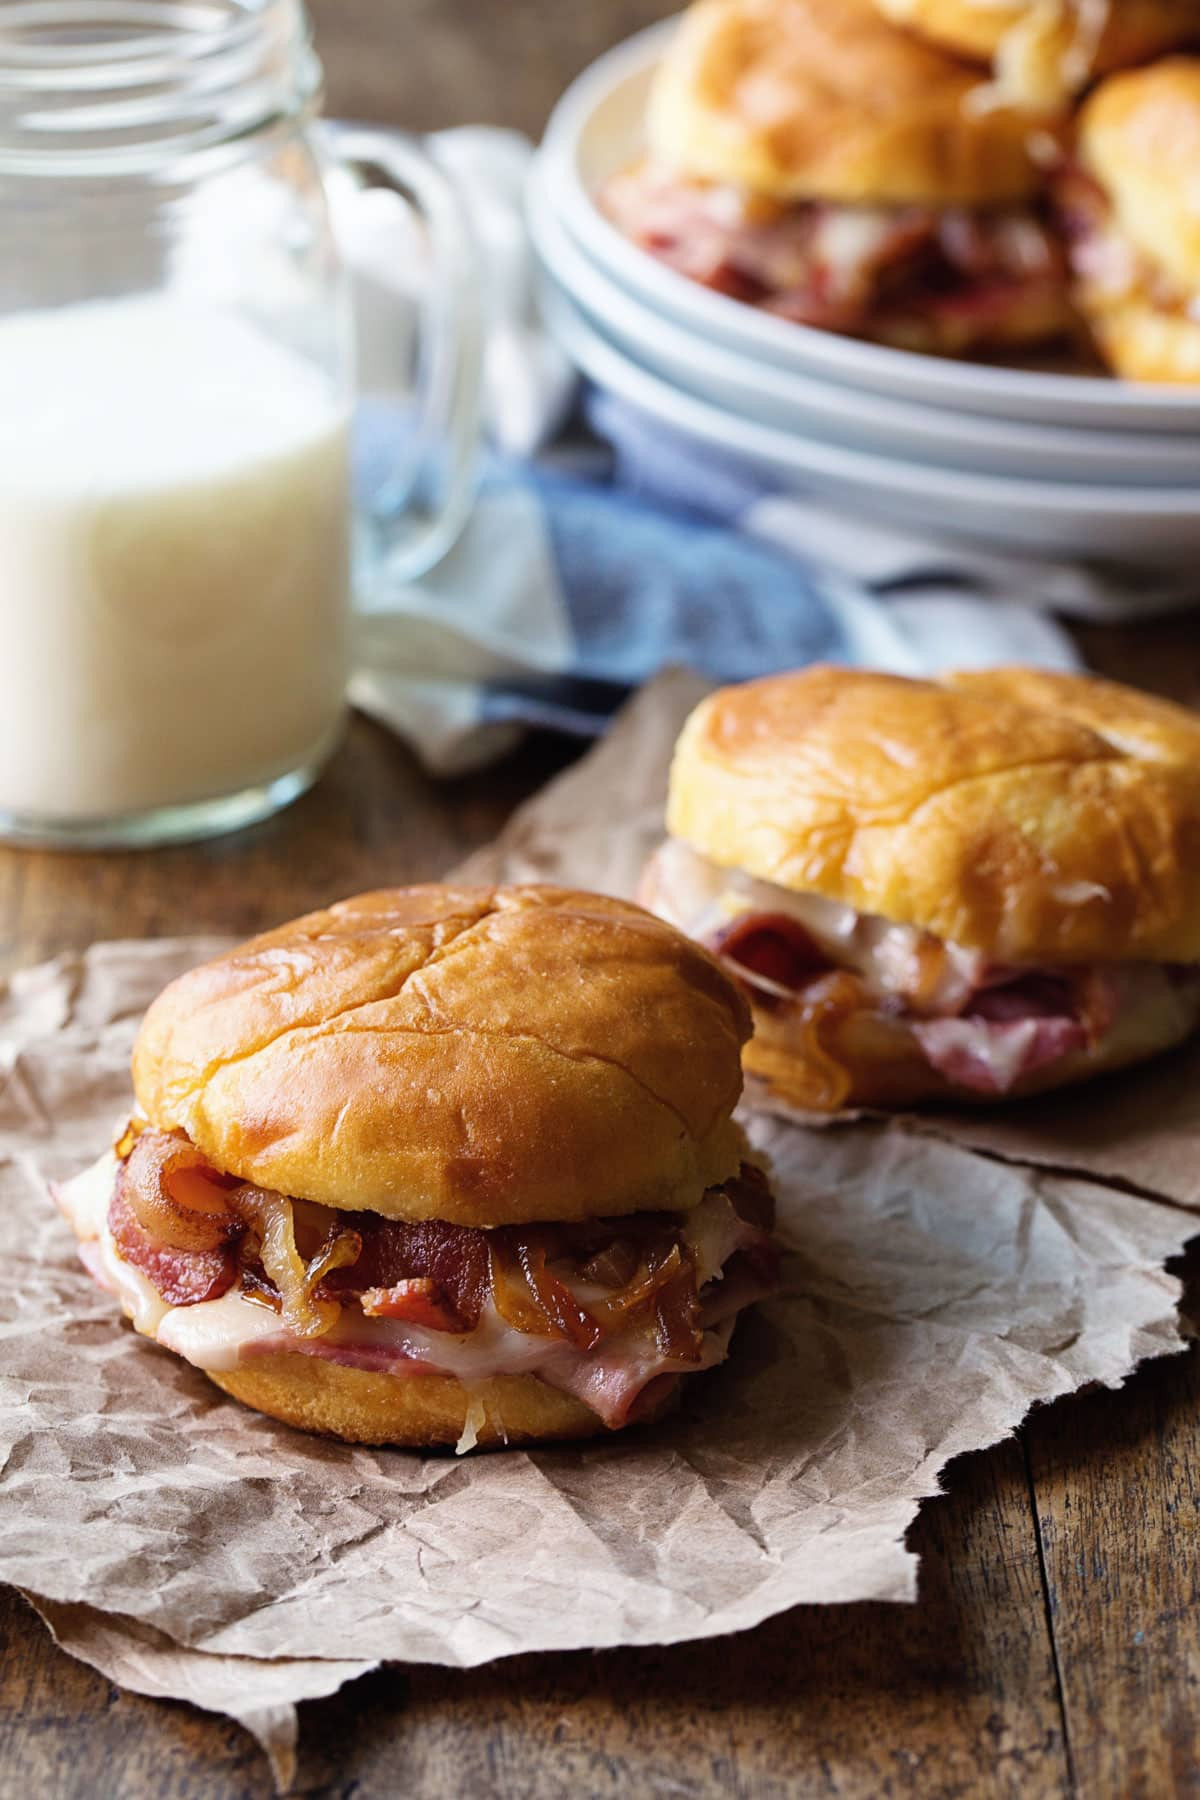 Baked Ham And Cheese Sandwiches In Foil
 Hot Ham and Cheese Sandwiches with Bacon and Caramelized